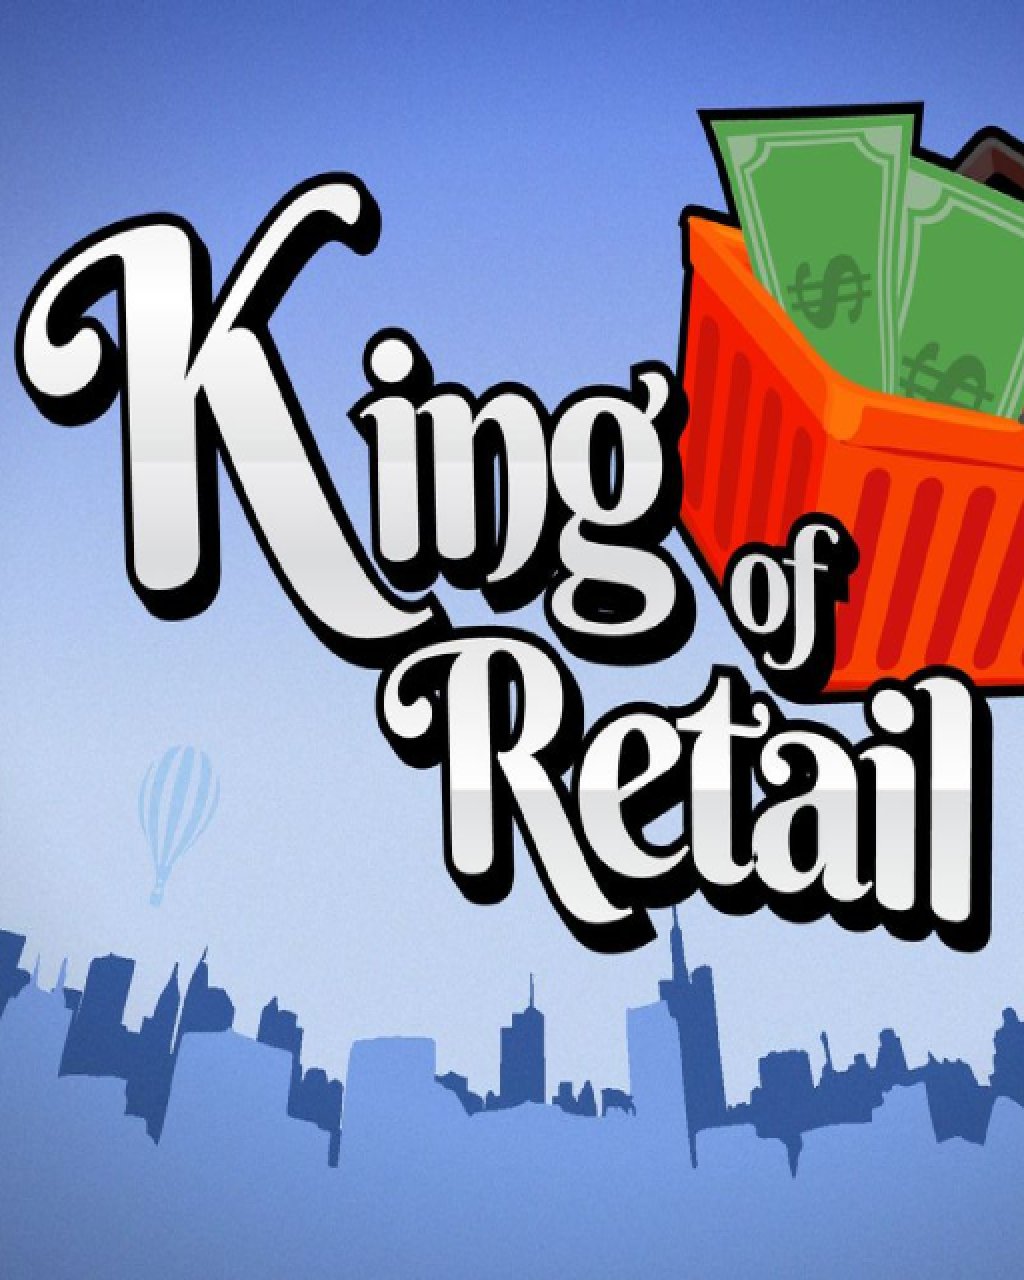 ESD King of Retail